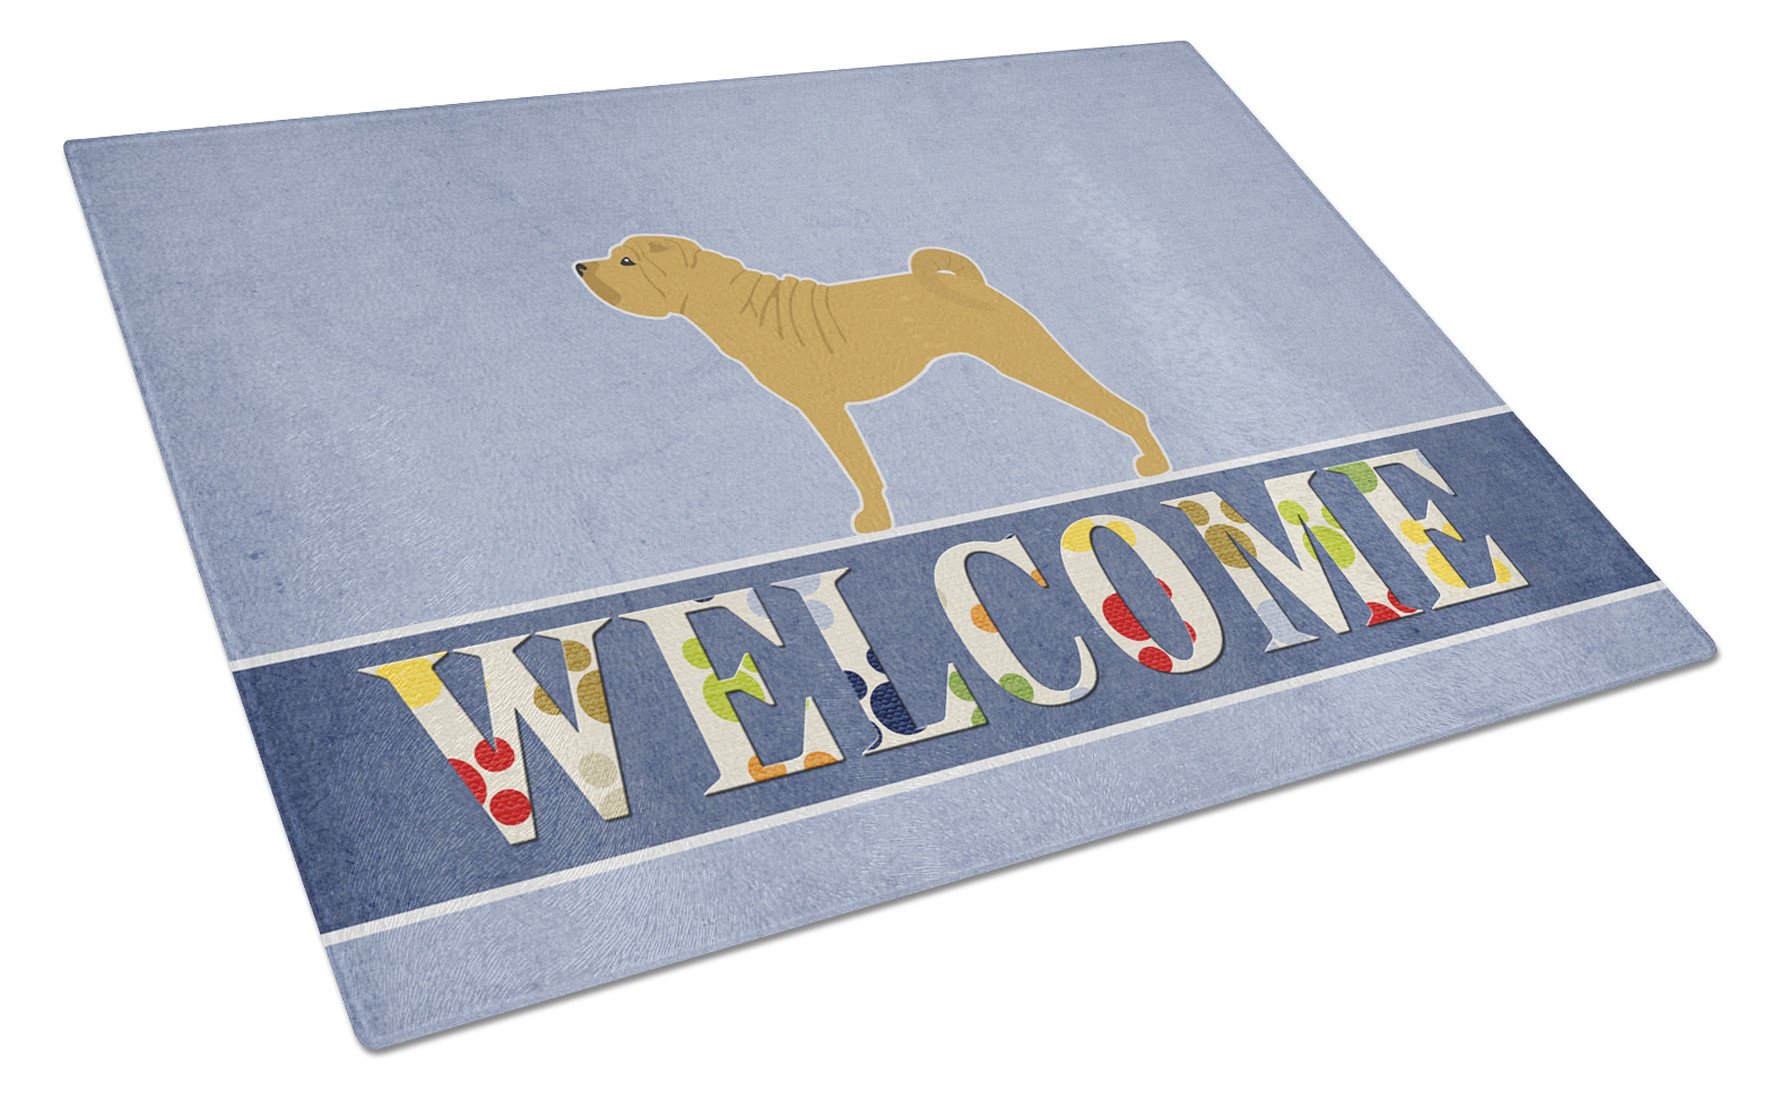 Shar Pei Merry Welcome Glass Cutting Board Large BB5556LCB by Caroline's Treasures